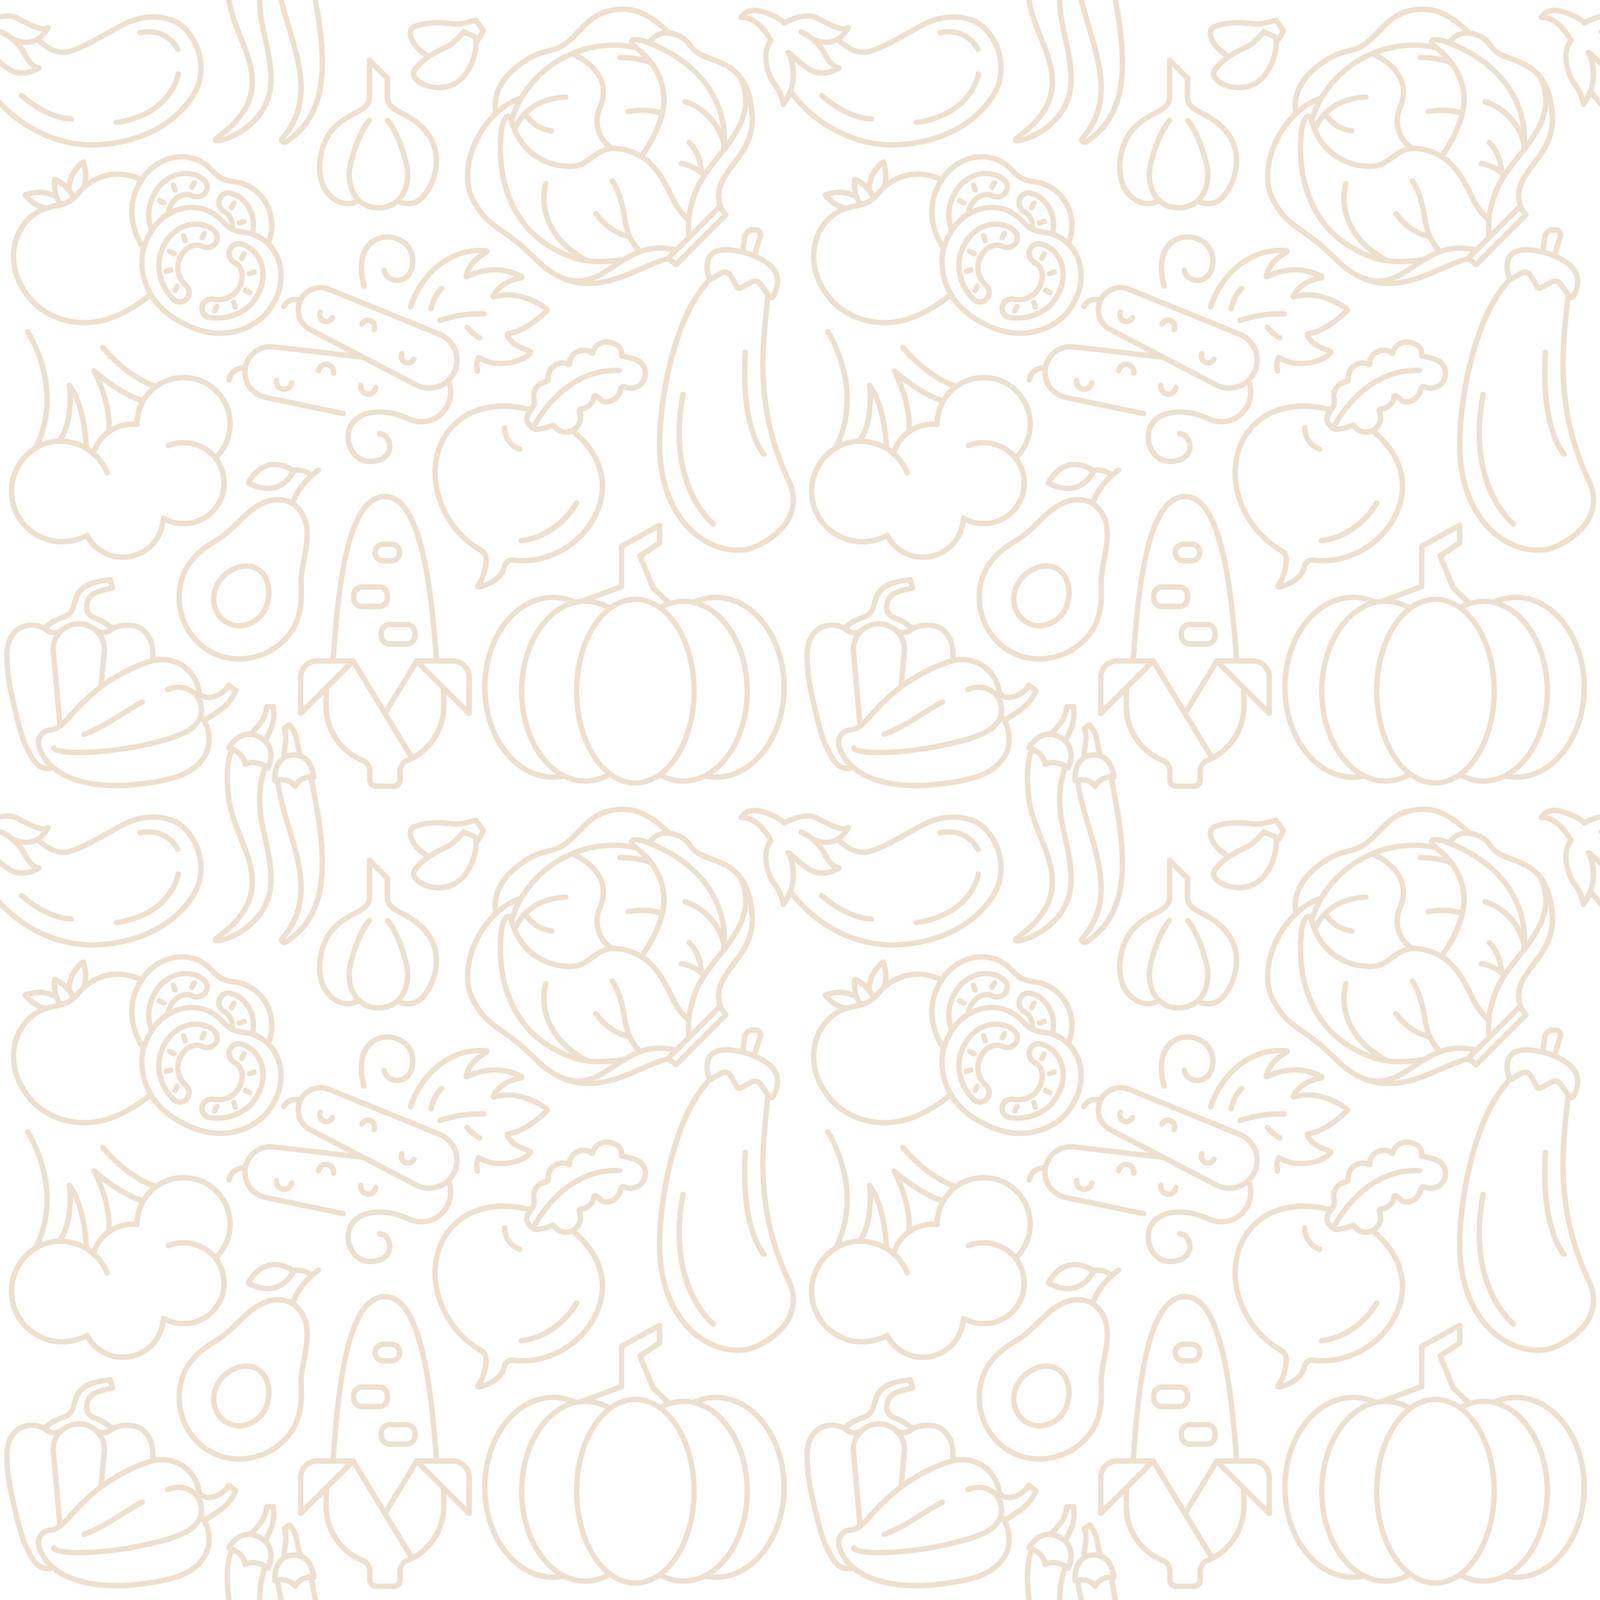 Farm harvest abstract seamless pattern. Editable vector shapes on white background. Trendy texture with cartoon color icons. Design with graphic elements for interior, fabric, website decoration